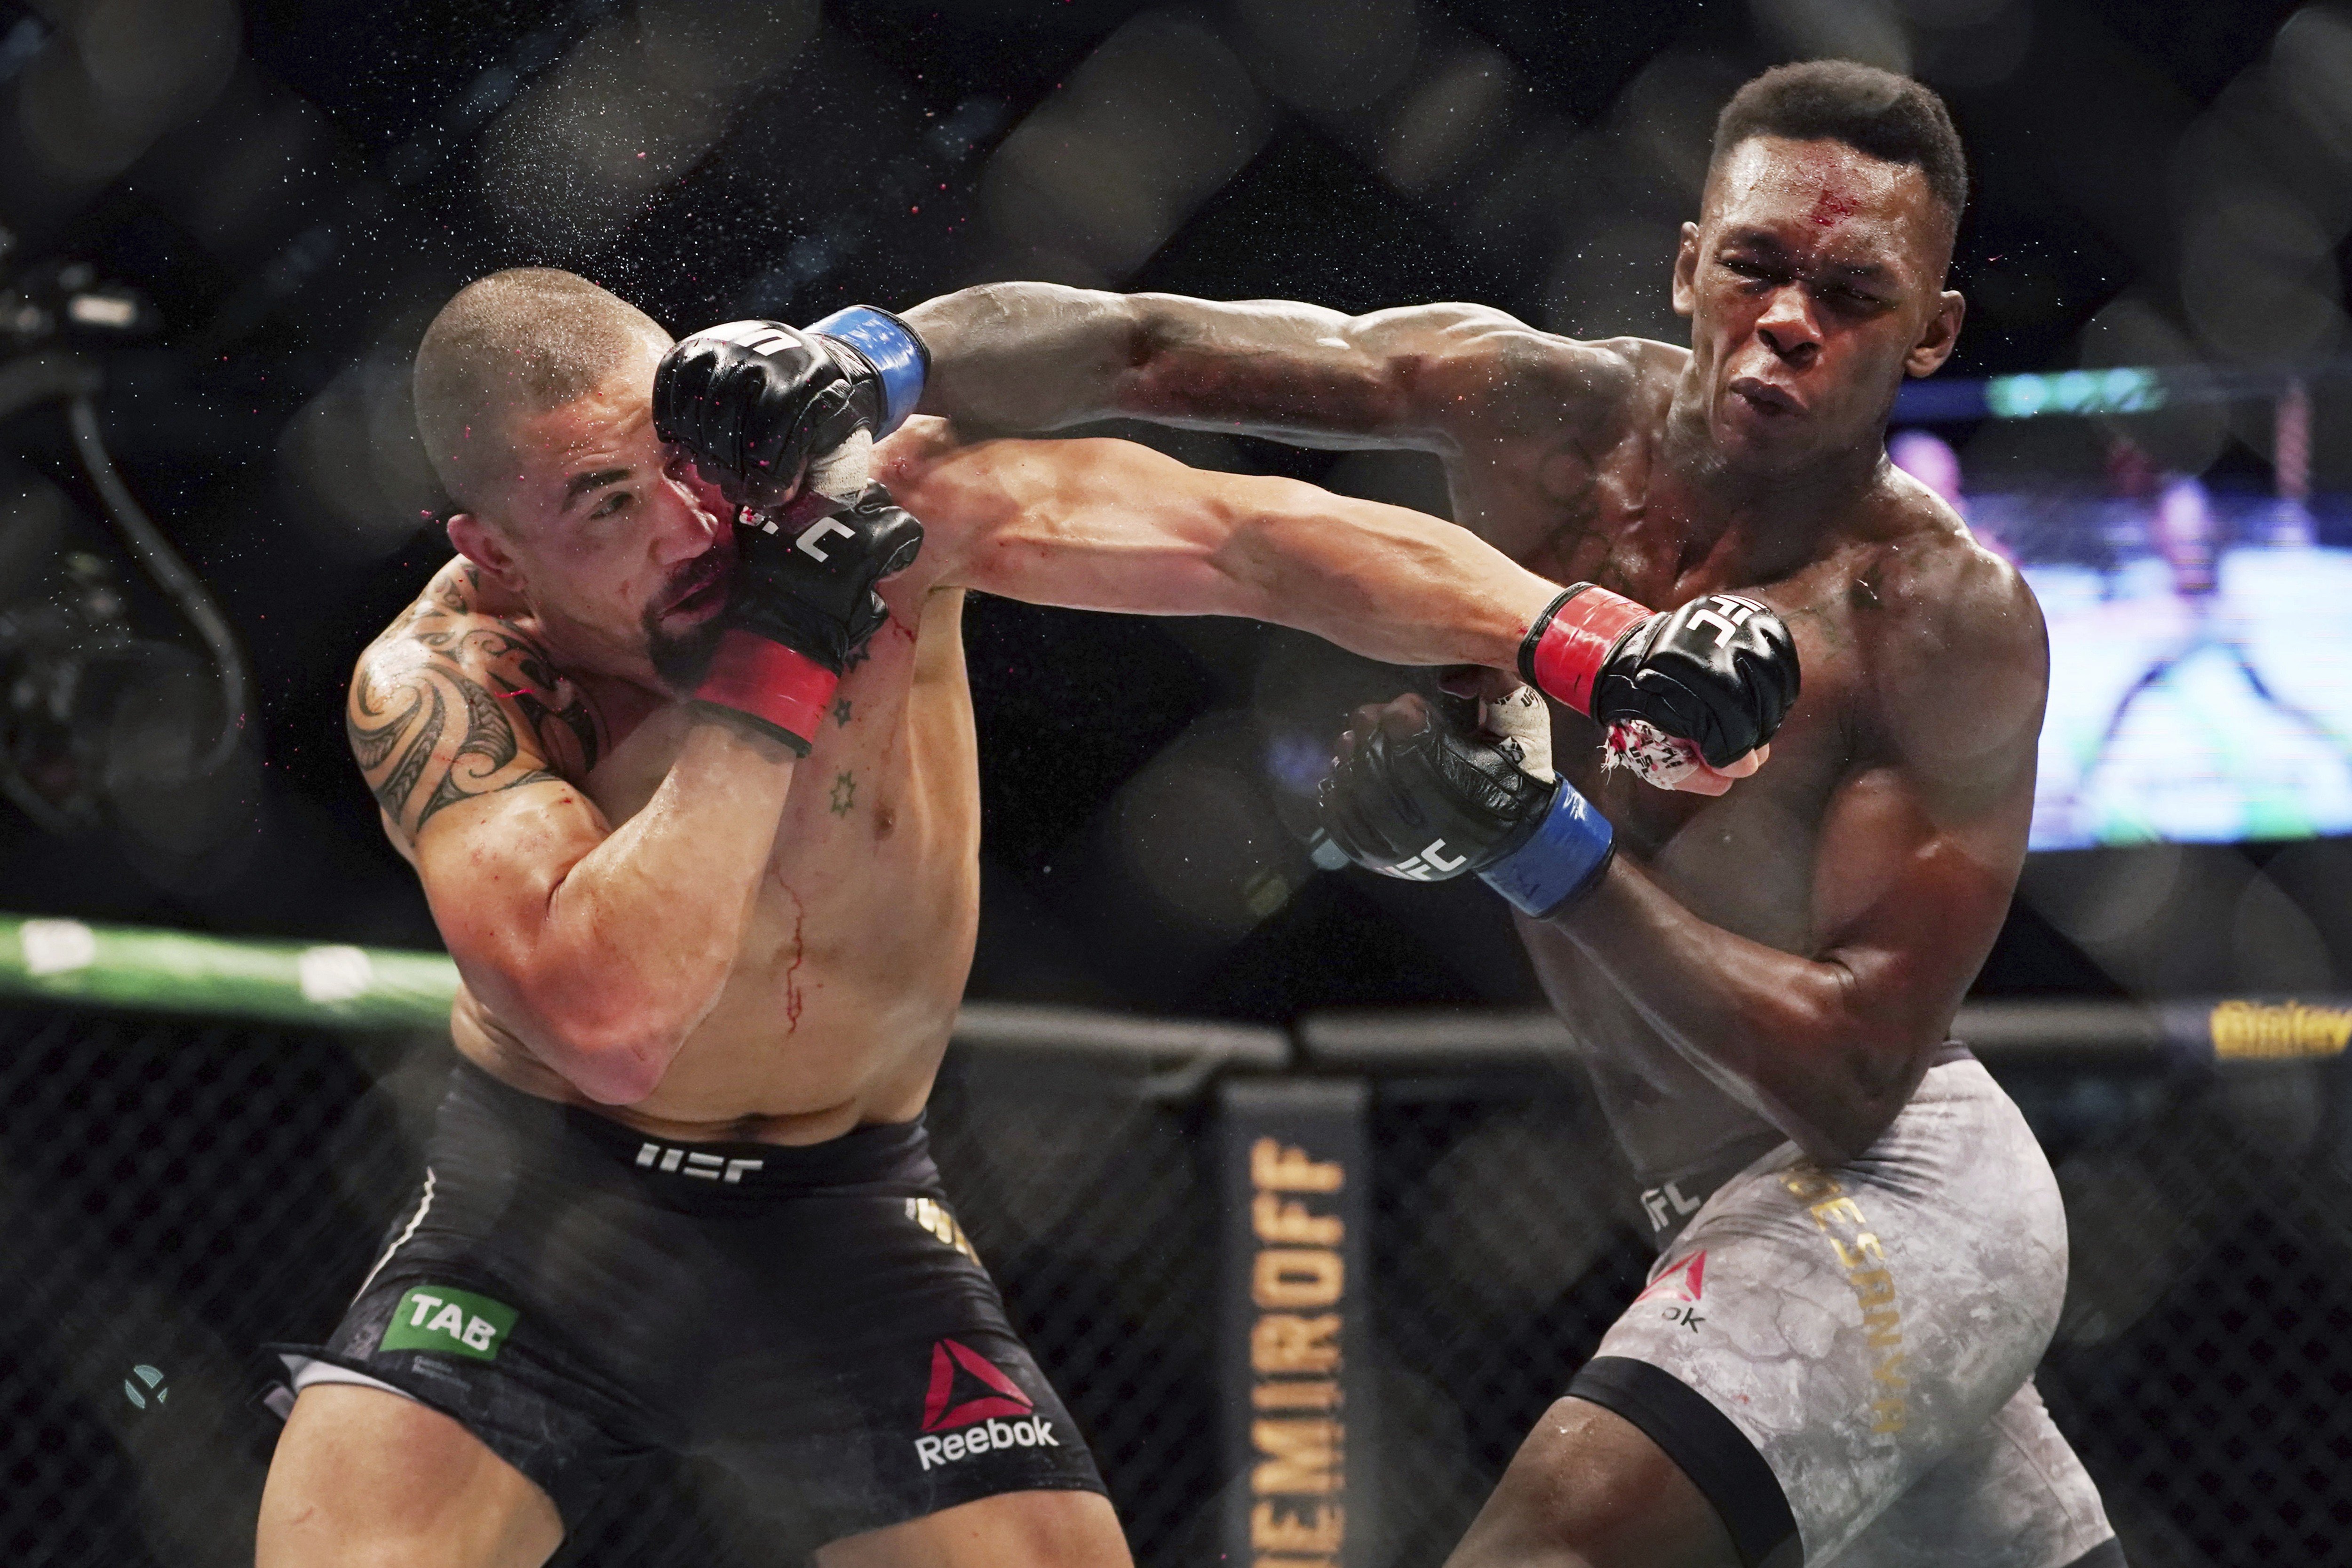 Israel Adesanya (right) throws a right straight at former champion Robert Whittaker at their UFC 243 middleweight unification fight in October last year. Photo: AP